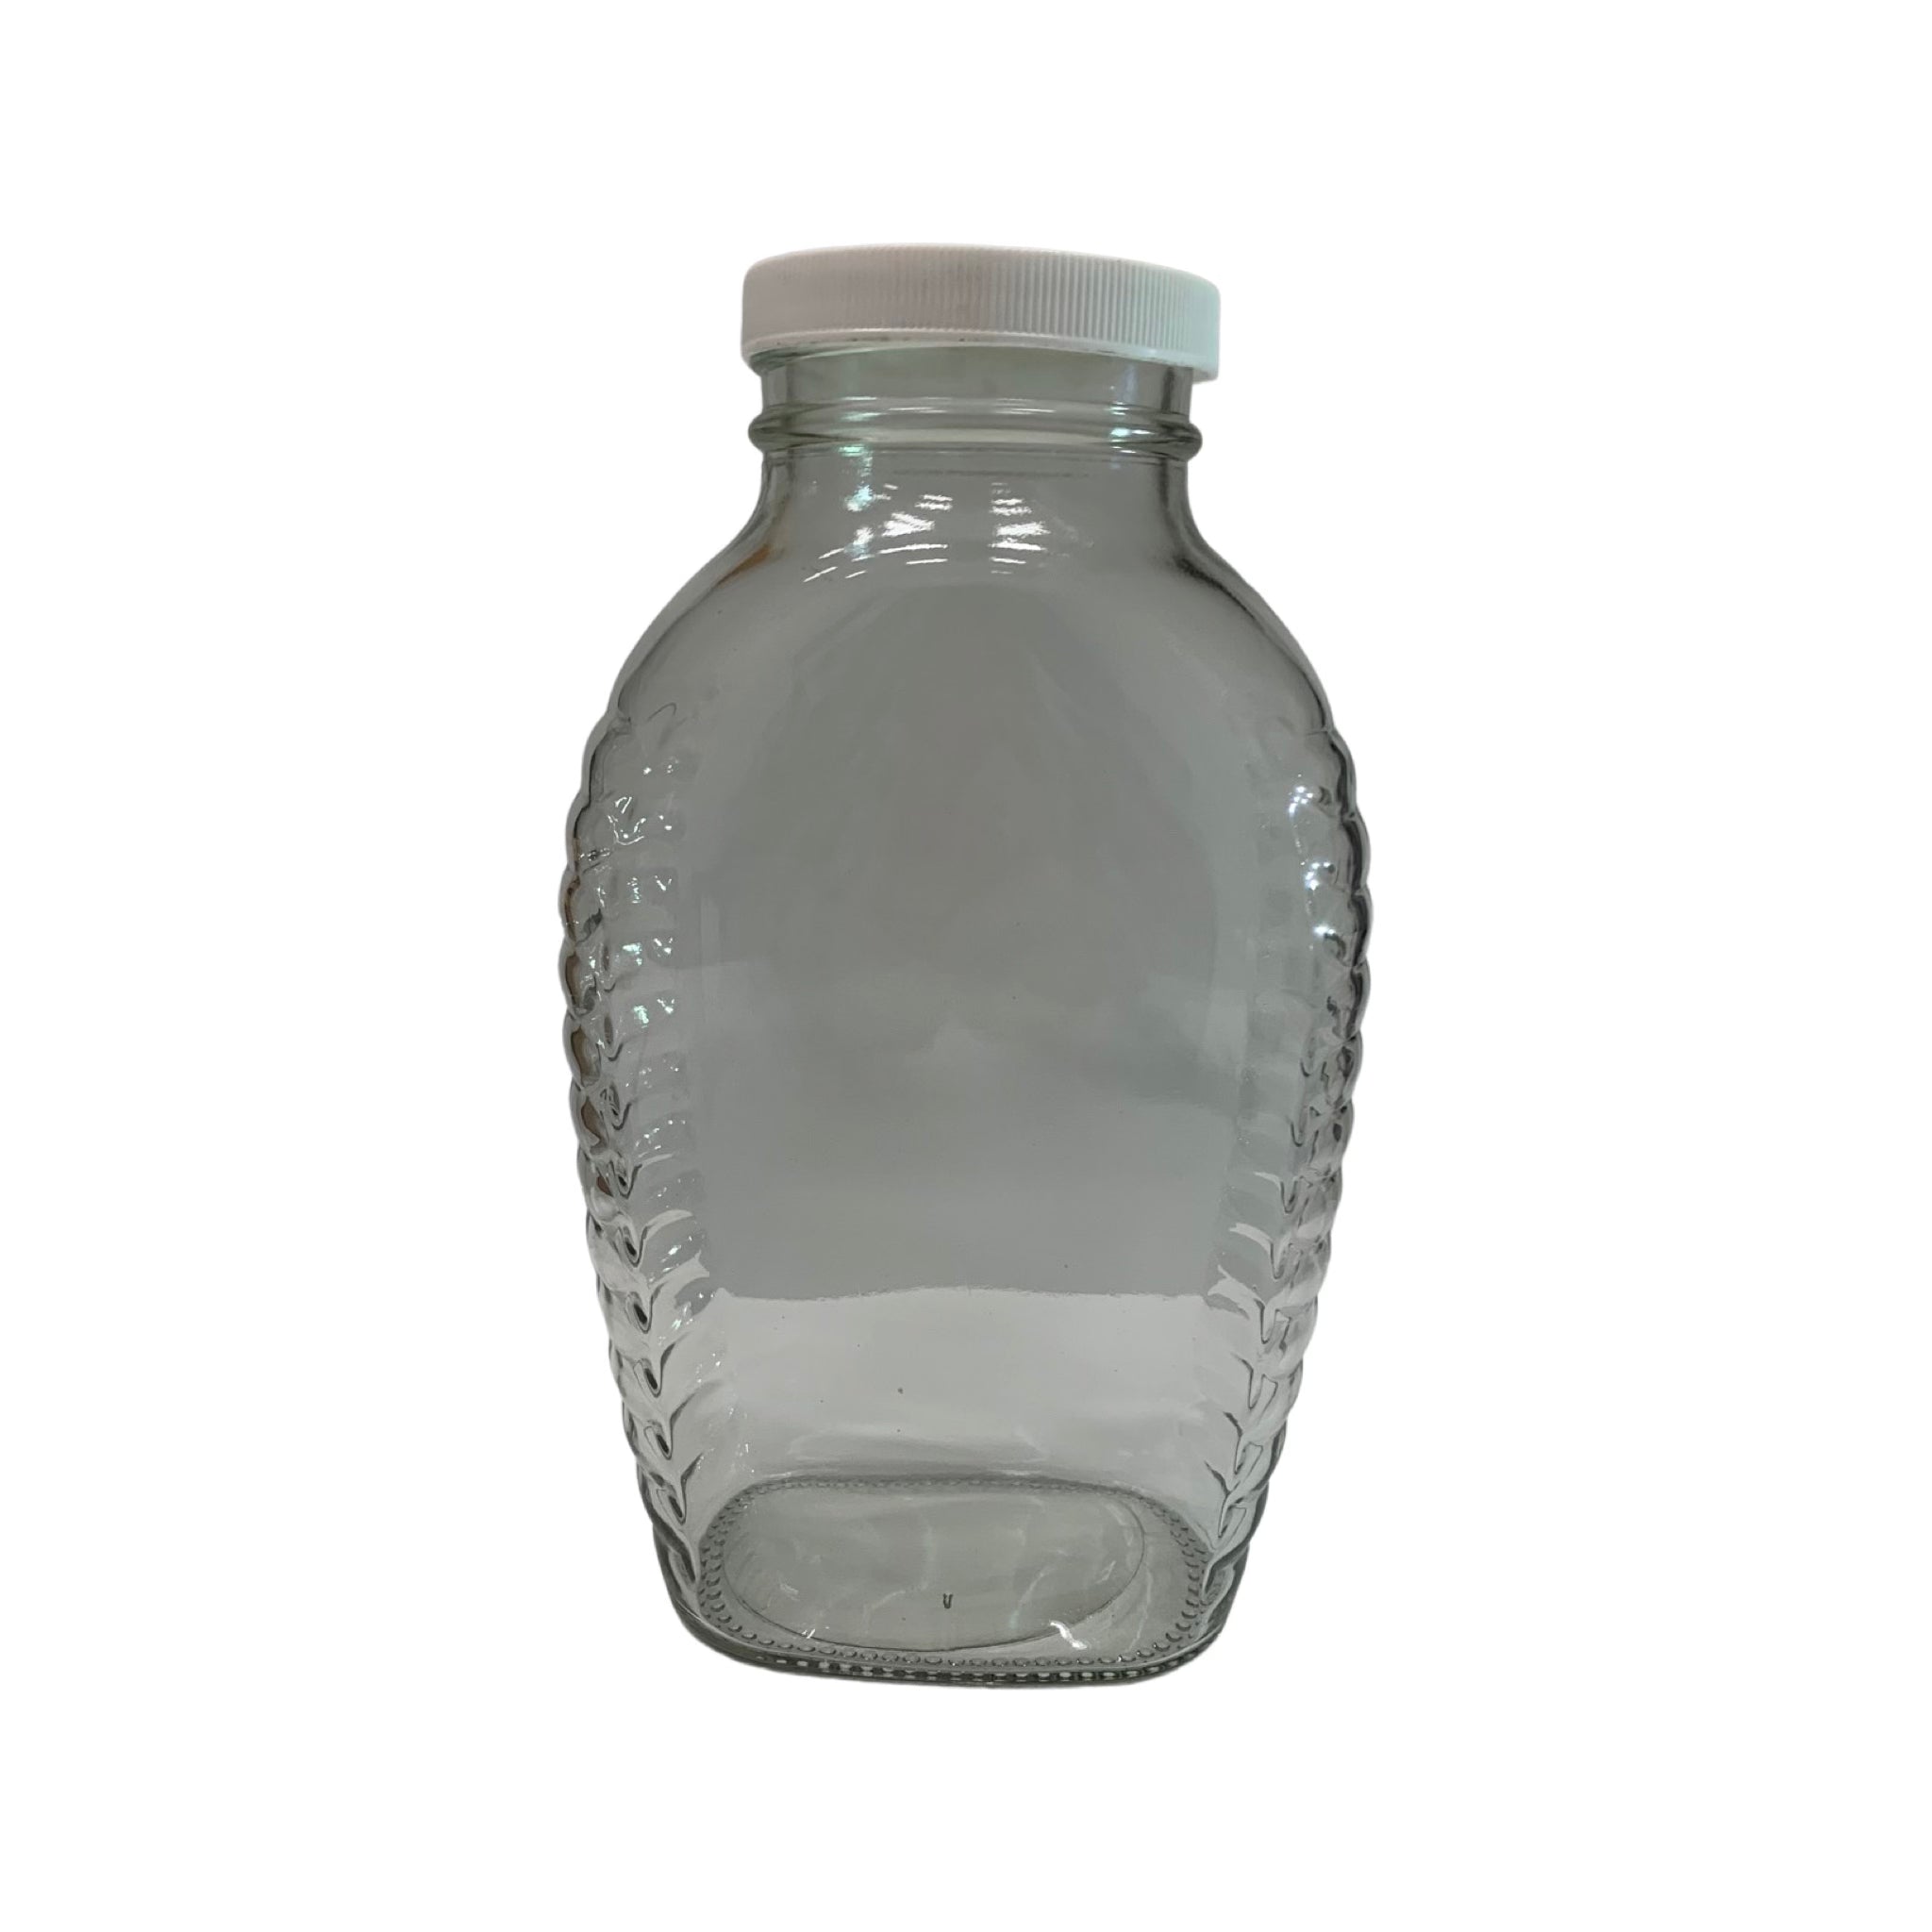 Glass jar without lids in 24 package